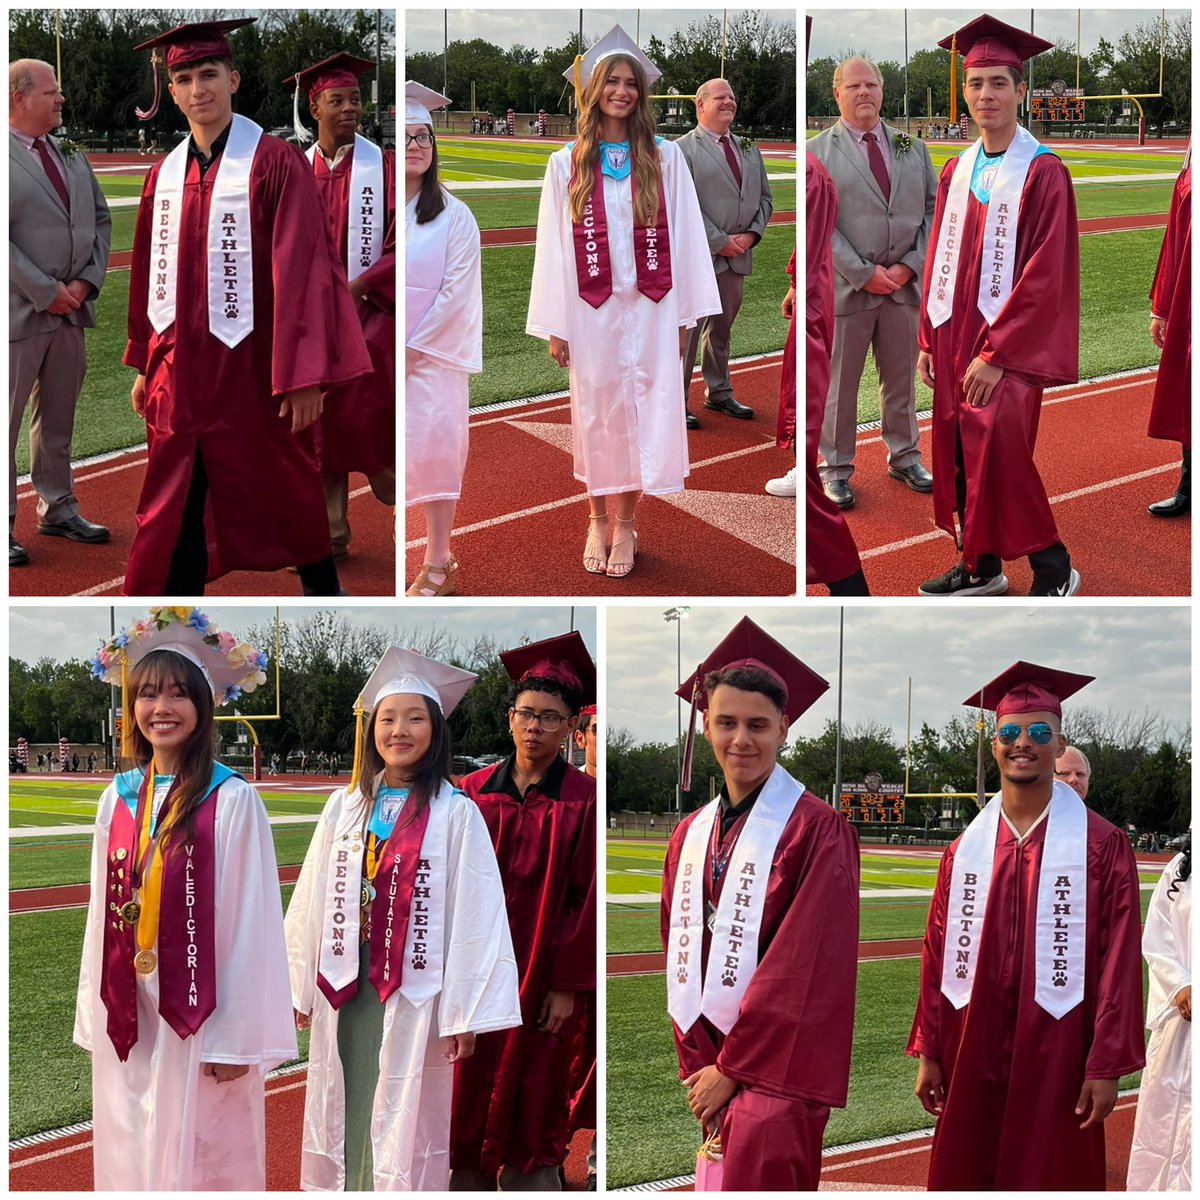 Congrats Class of 2023!!! You will be missed on the court and field. 🐾🅱️🎓#WildcatPride #BectonsBest